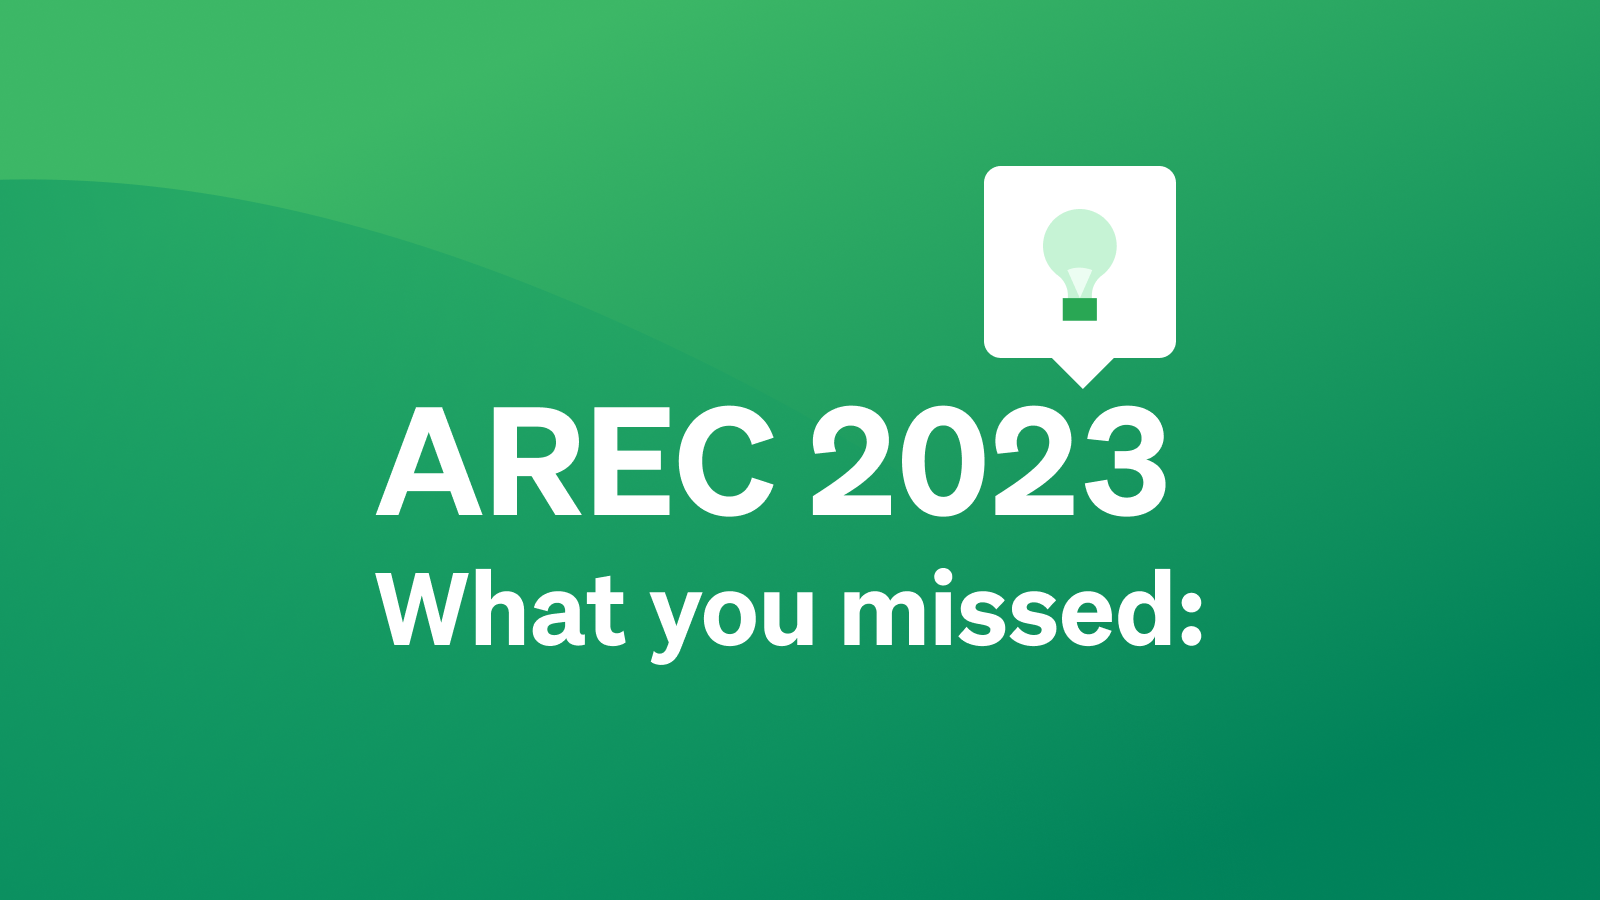 AREC 2023 what you missed: